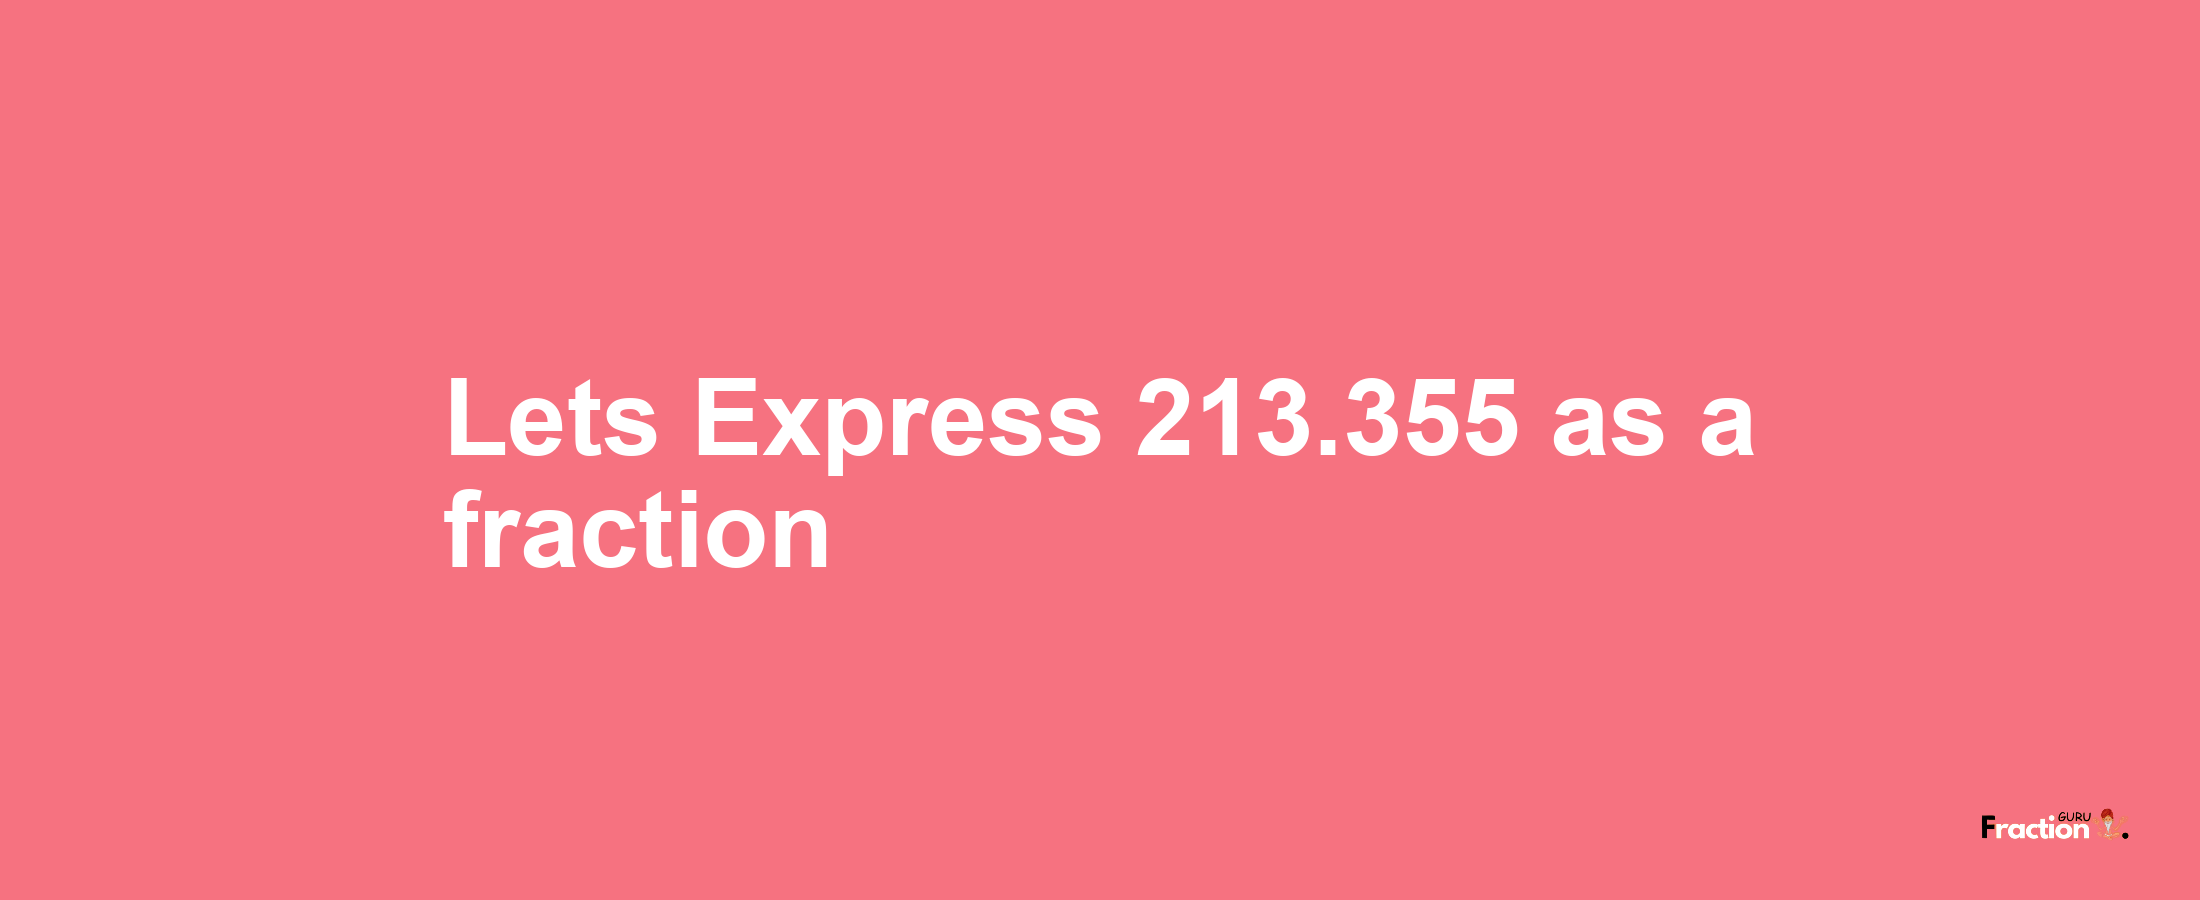 Lets Express 213.355 as afraction